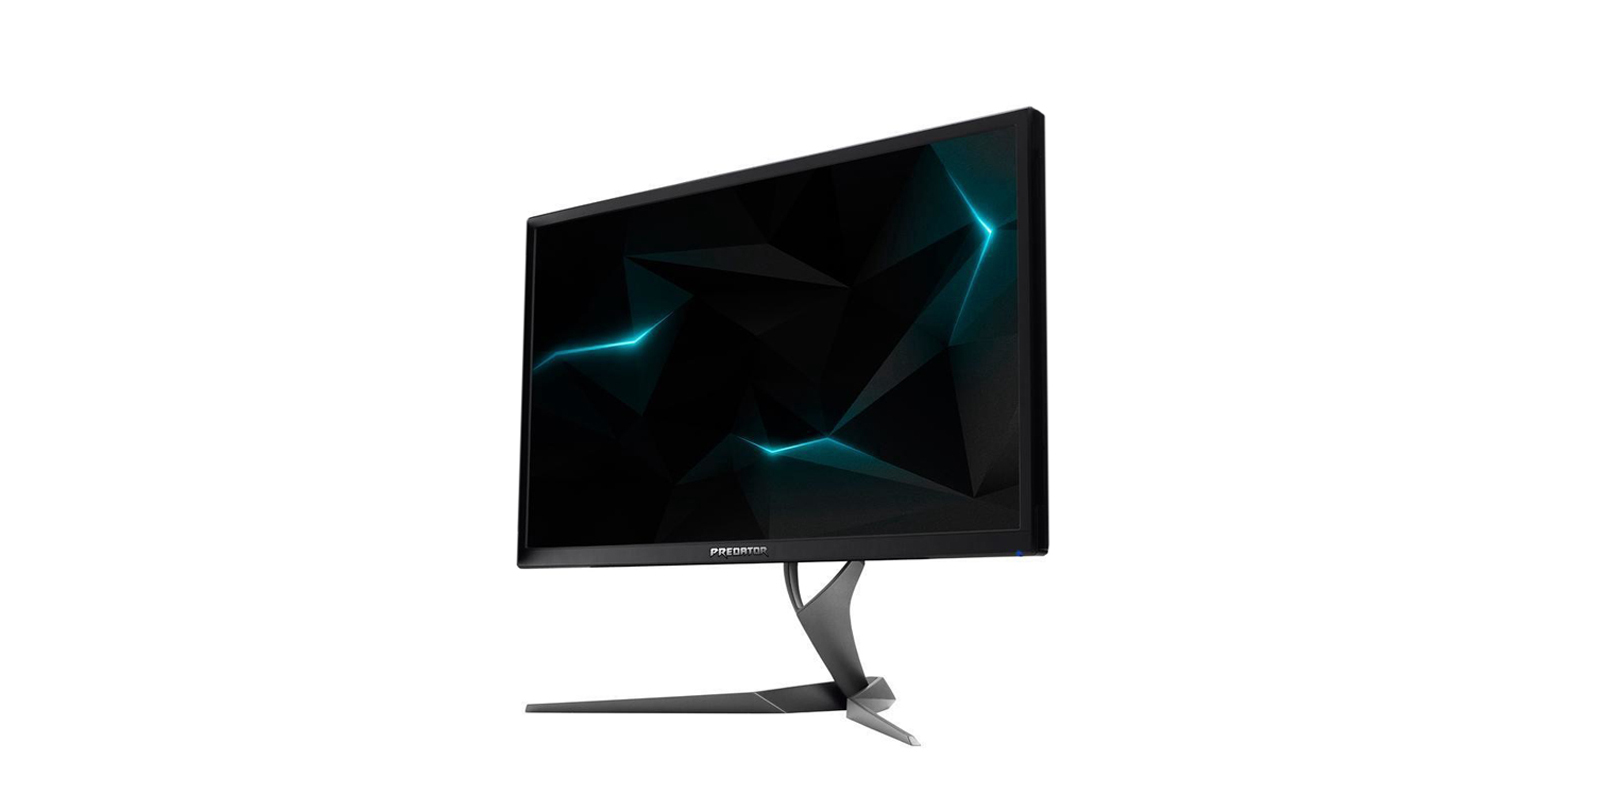 Nvidia Details New Acer 32 Inch Cranking 1440p At 240hz Refresh Rate In Xb323u Gx Blur Busters